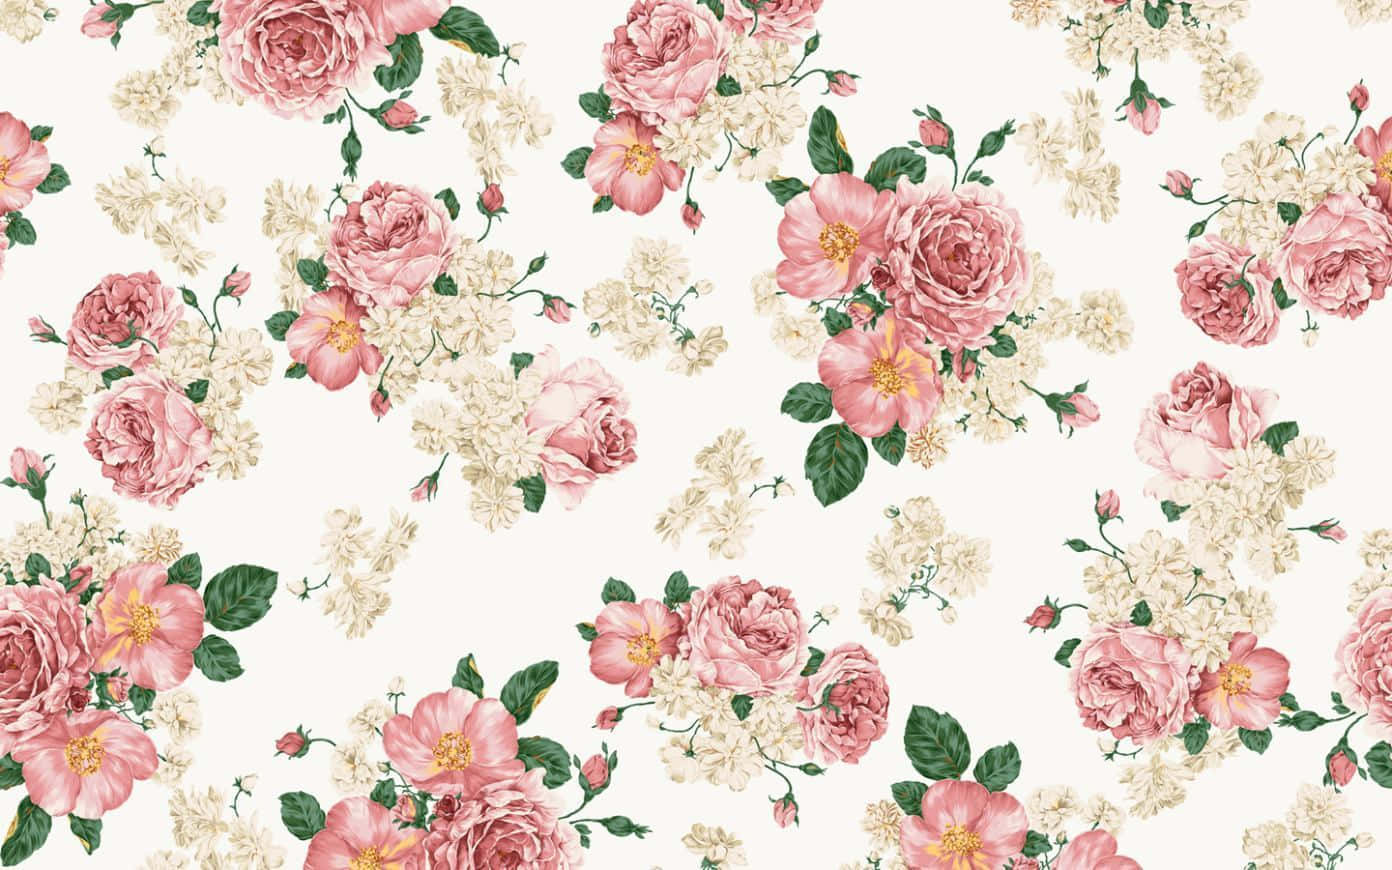 Shabby chic iPhone wallpaper by Kitty00000 on DeviantArt